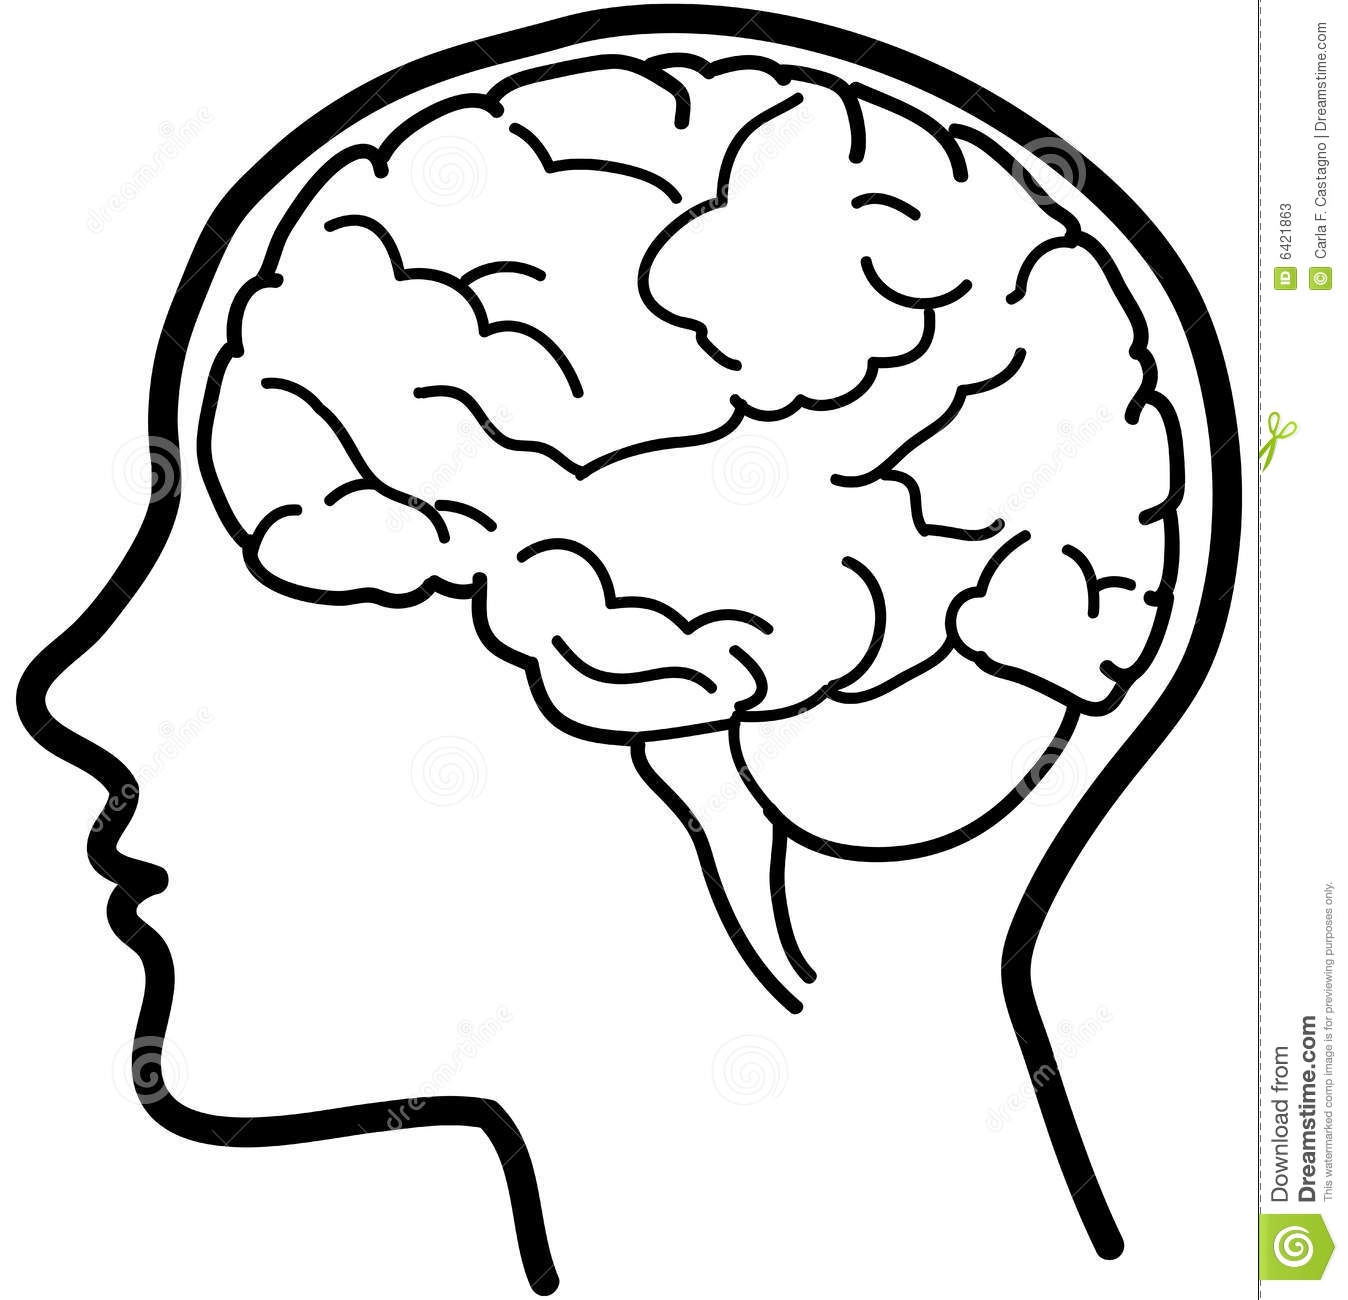 Brain Outline Clipart Black And White.